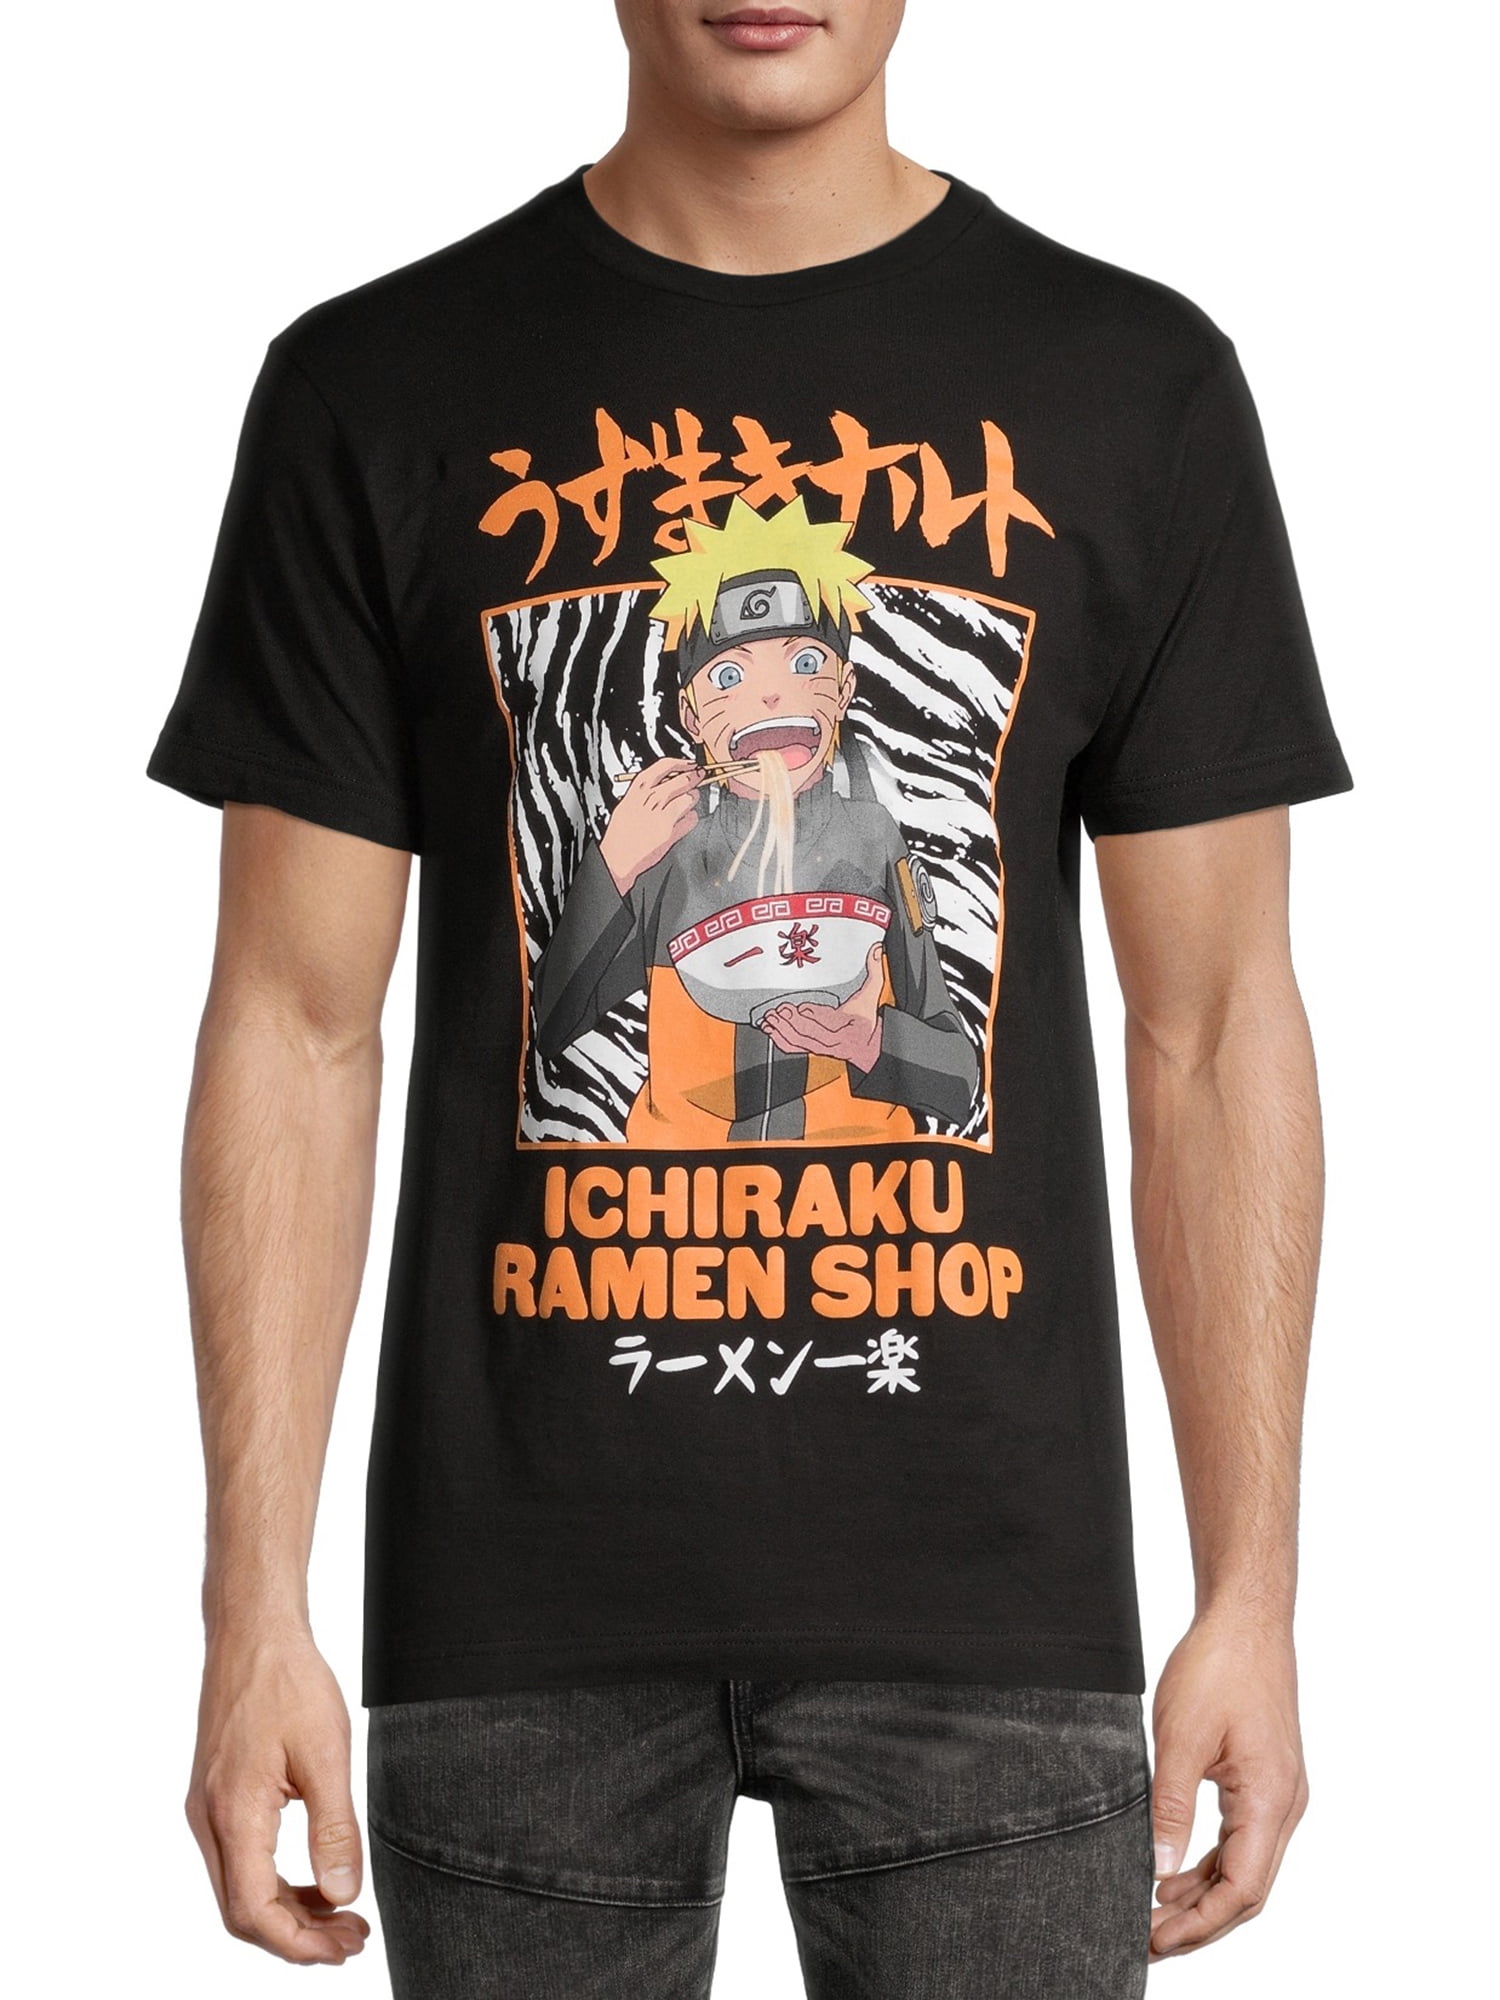 Fictional Love Gifts For Anime Lovers T-Shirts